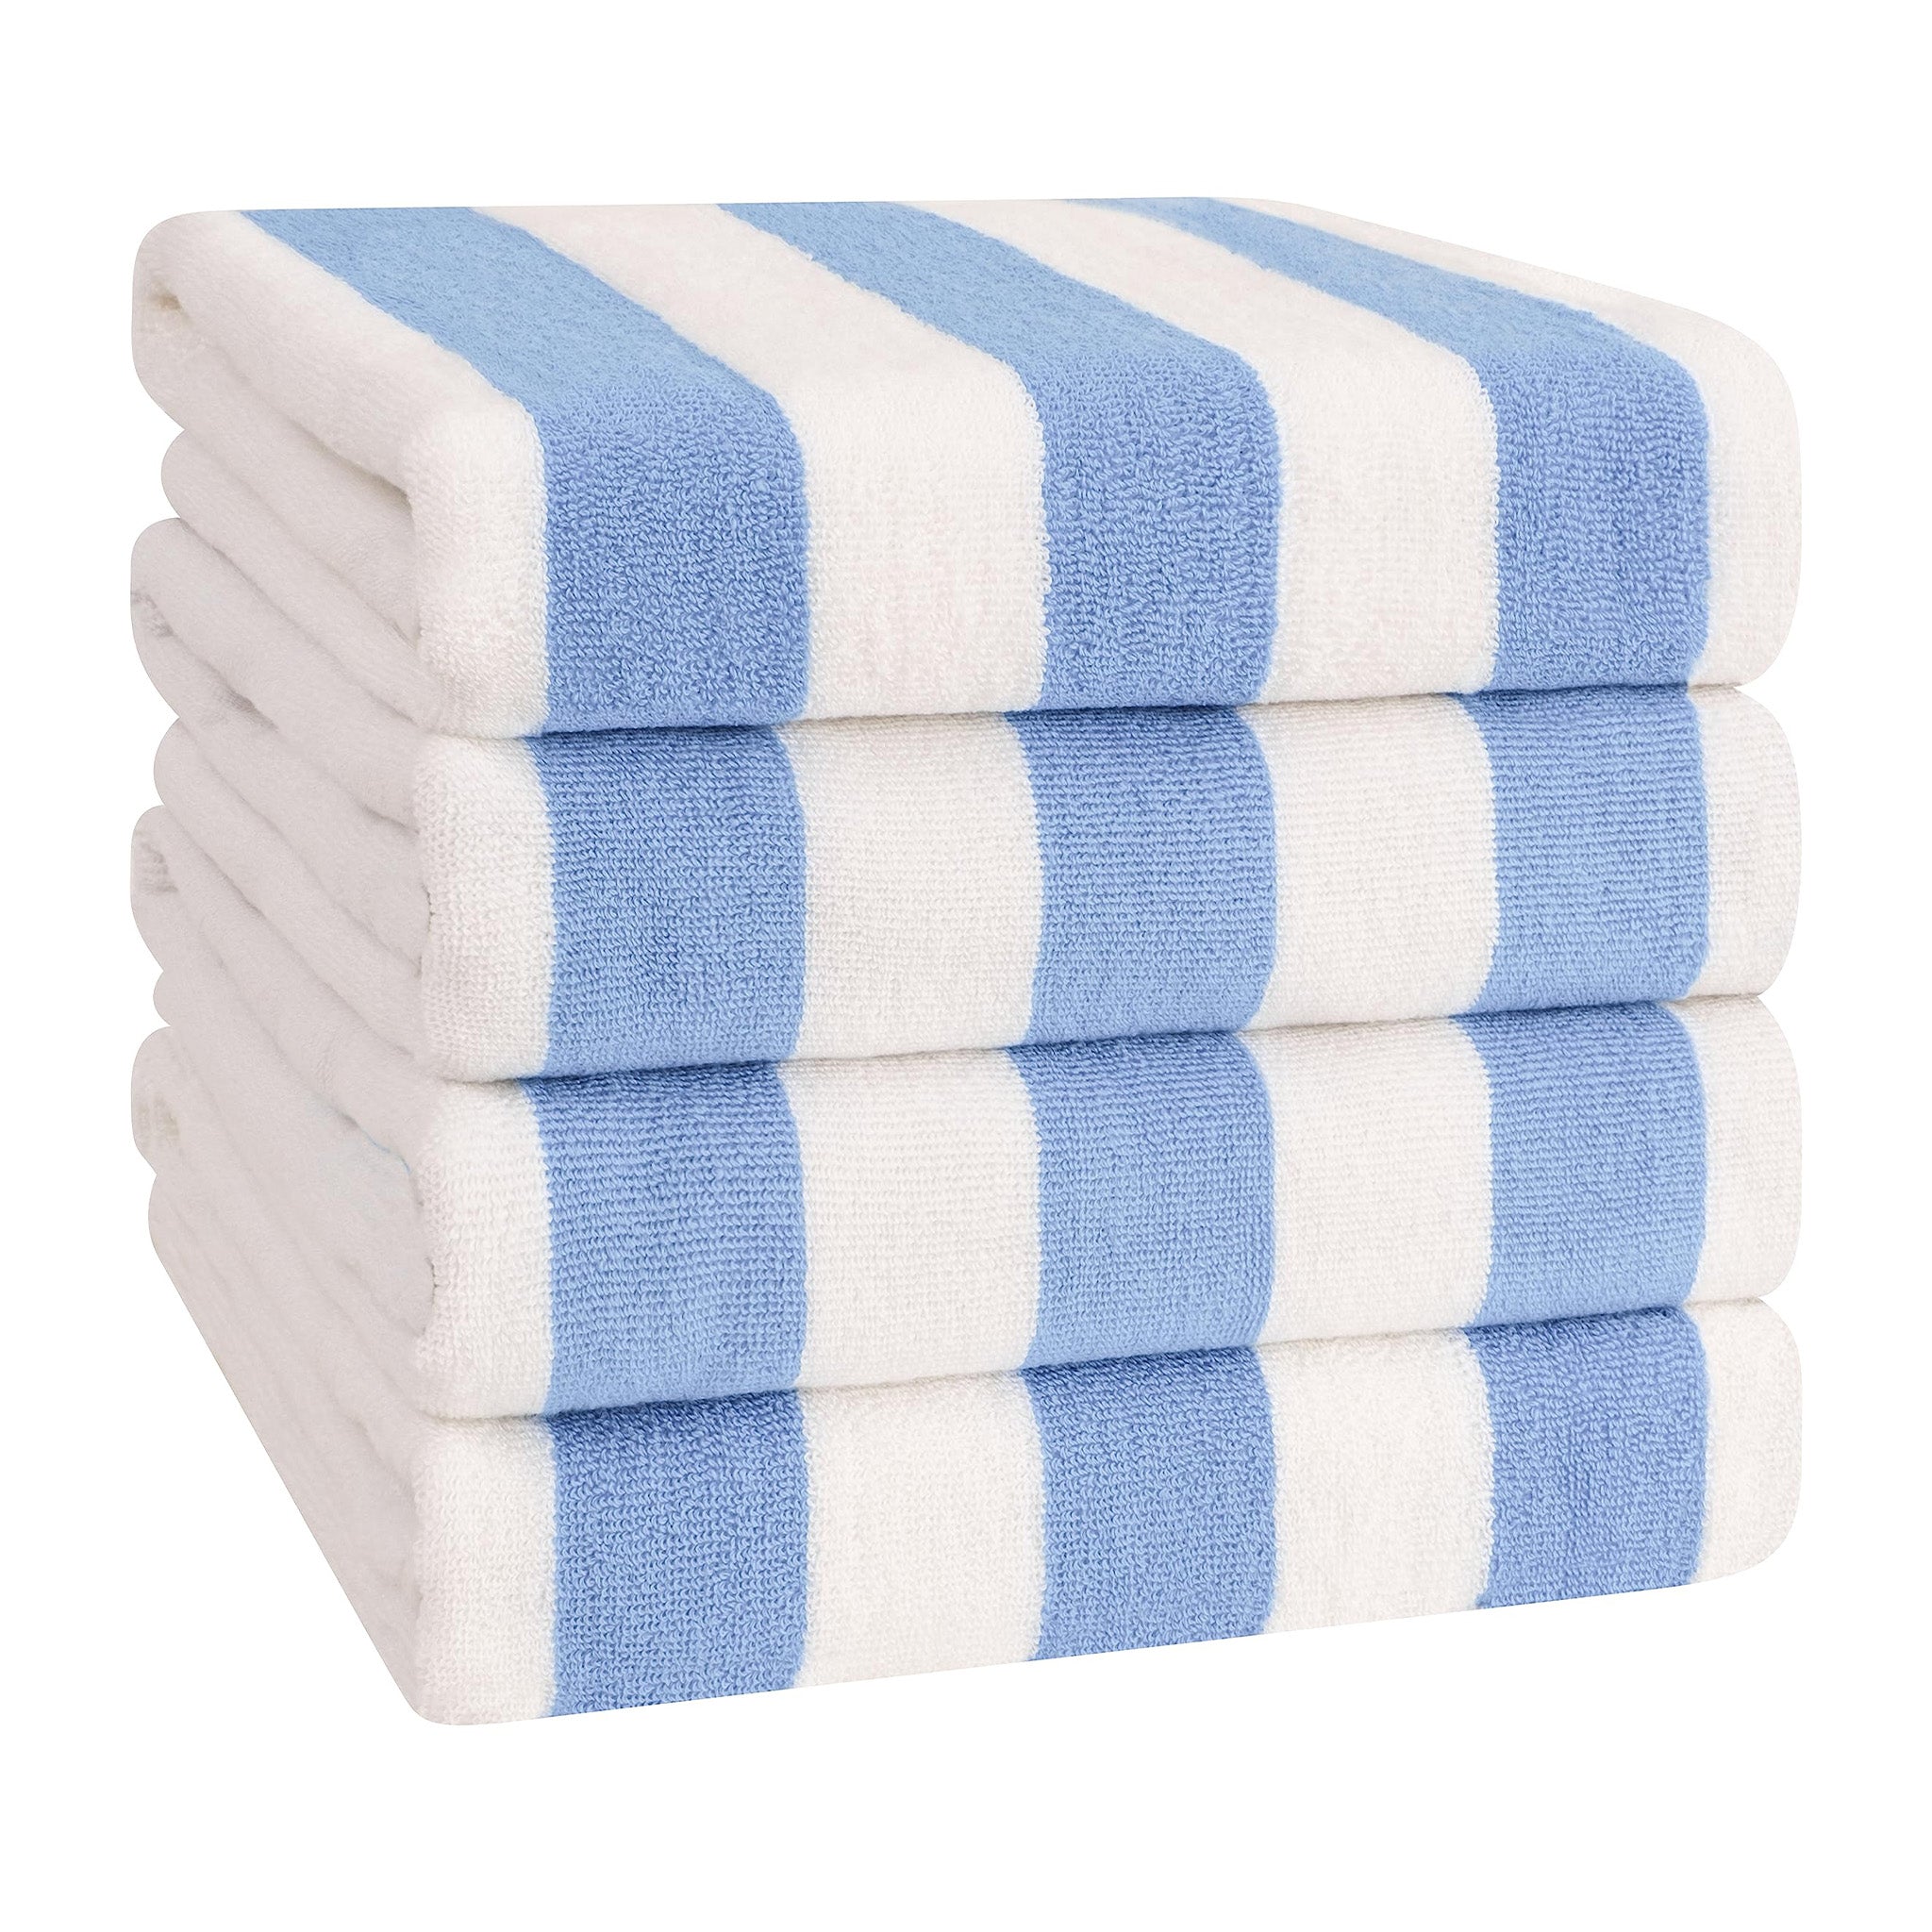 American Soft Linen 100% Cotton 4 Pack Beach Towels Cabana Striped Pool Towels -sky-blue-1